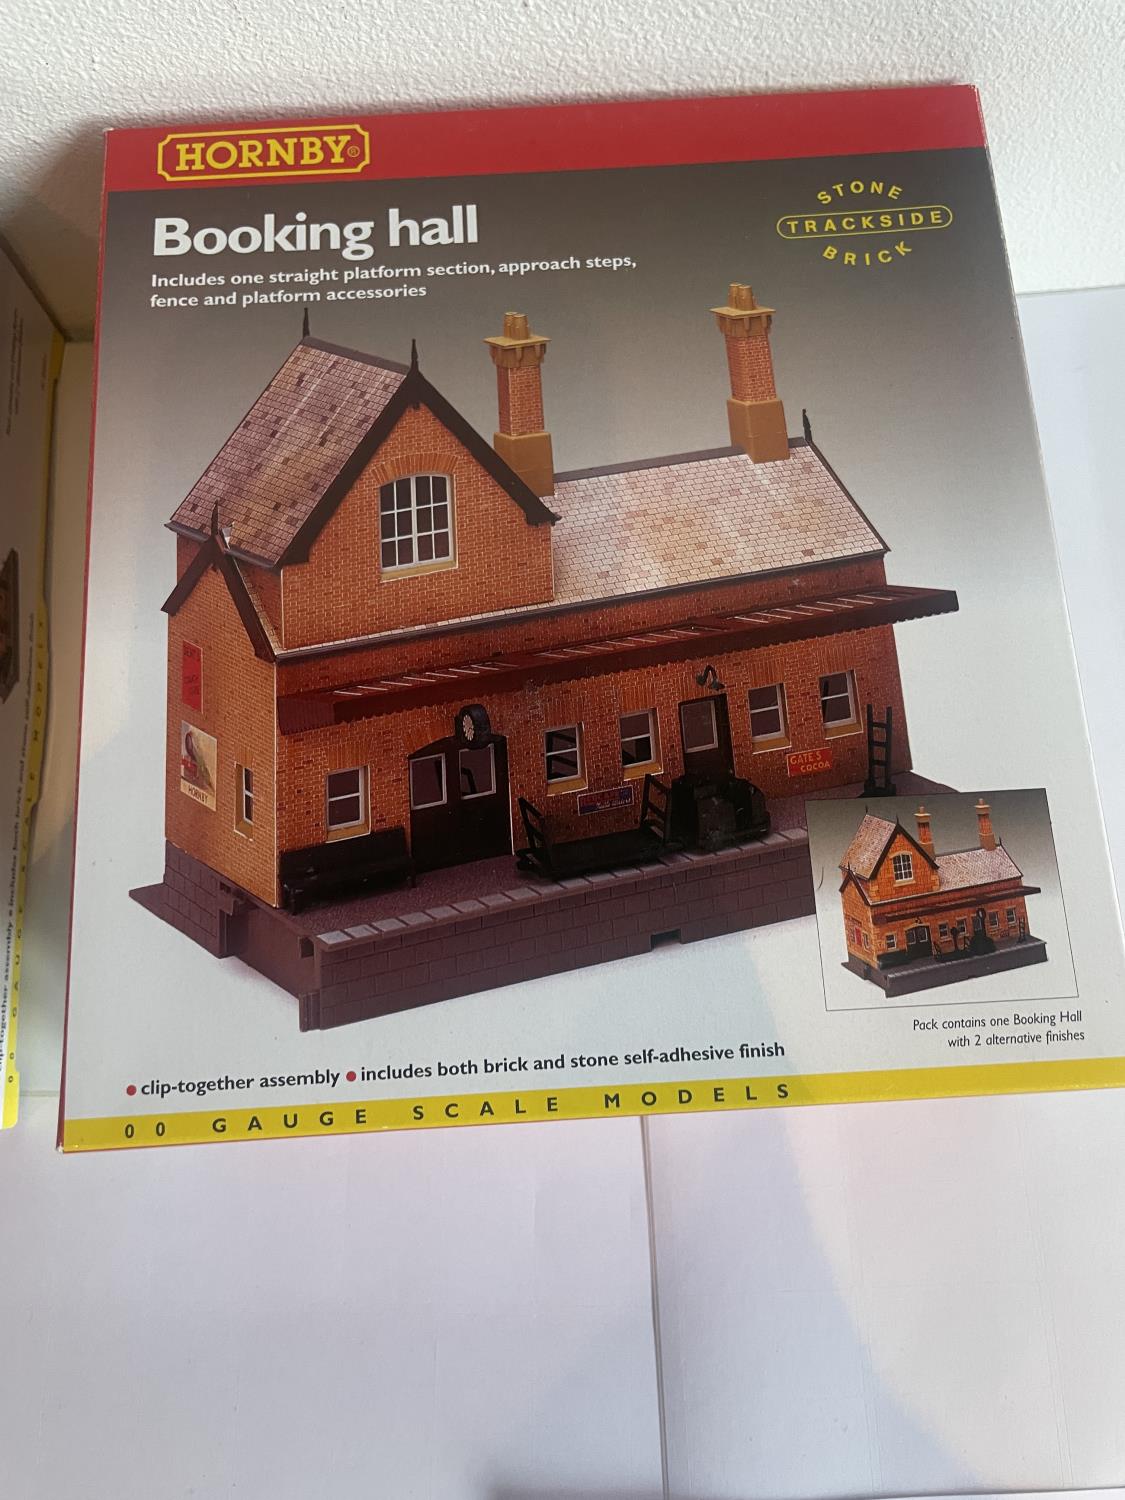 TWO AS NEW AND BOXED HORNBY 00 GAUGE RAILWAY MODELS TO INCLUDE A BOOKING HALLA AND A WAITING ROOM - Bild 3 aus 3